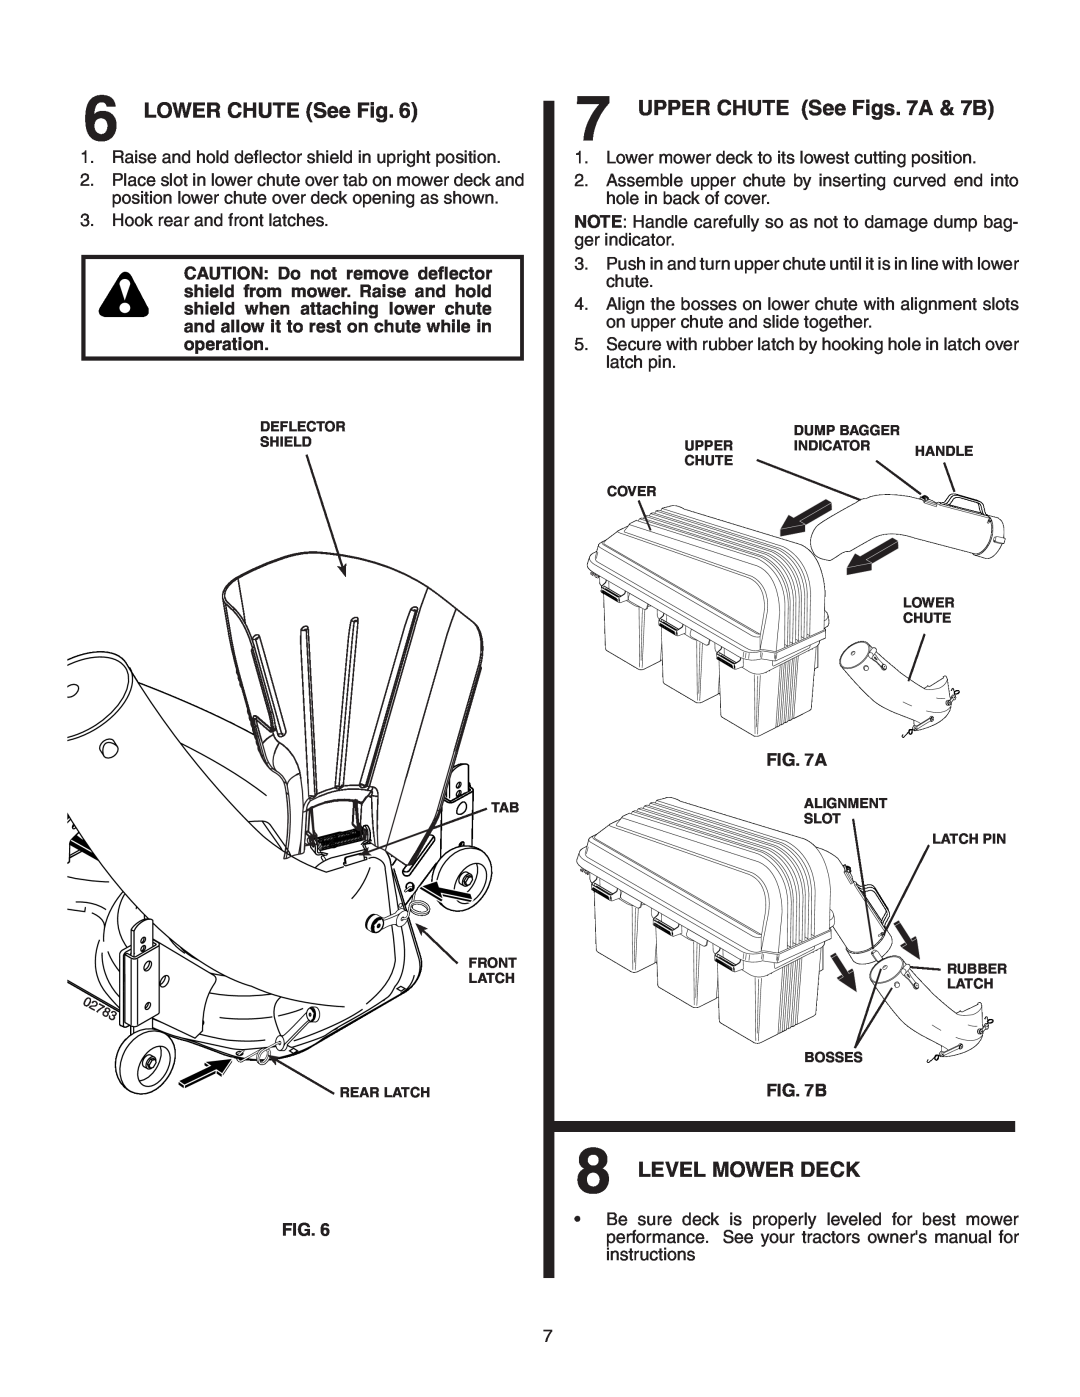 Poulan 532190226, GTB54A owner manual LOWER CHUTE See Fig, UPPER CHUTE See Figs. 7A & 7B, Level Mower Deck 